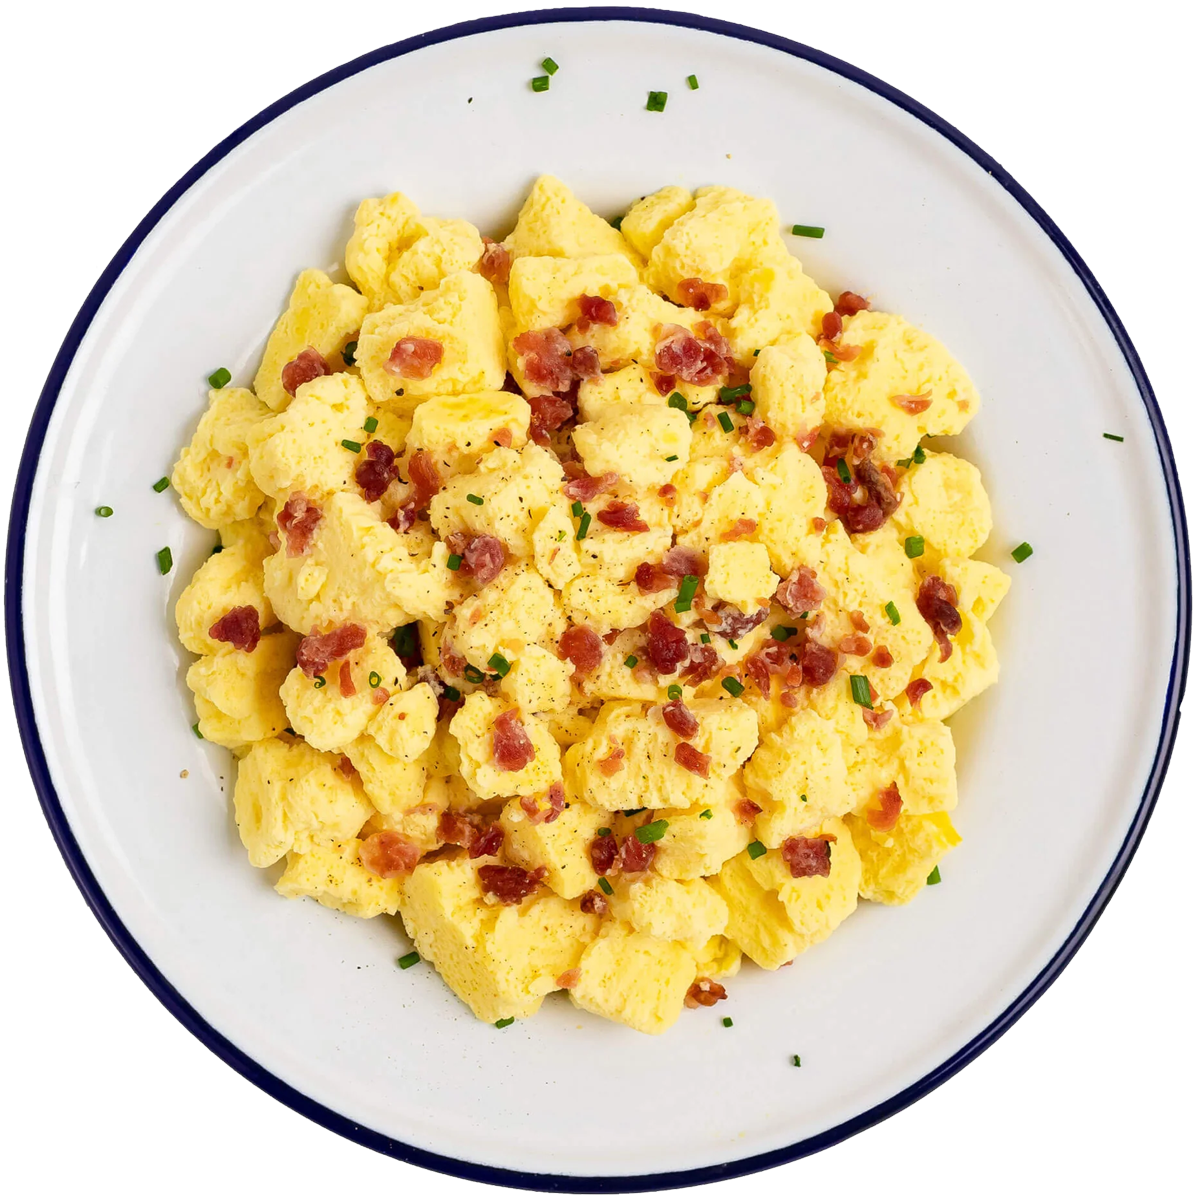 Scrambled Eggs with Bacon (1 Serving) alternate view